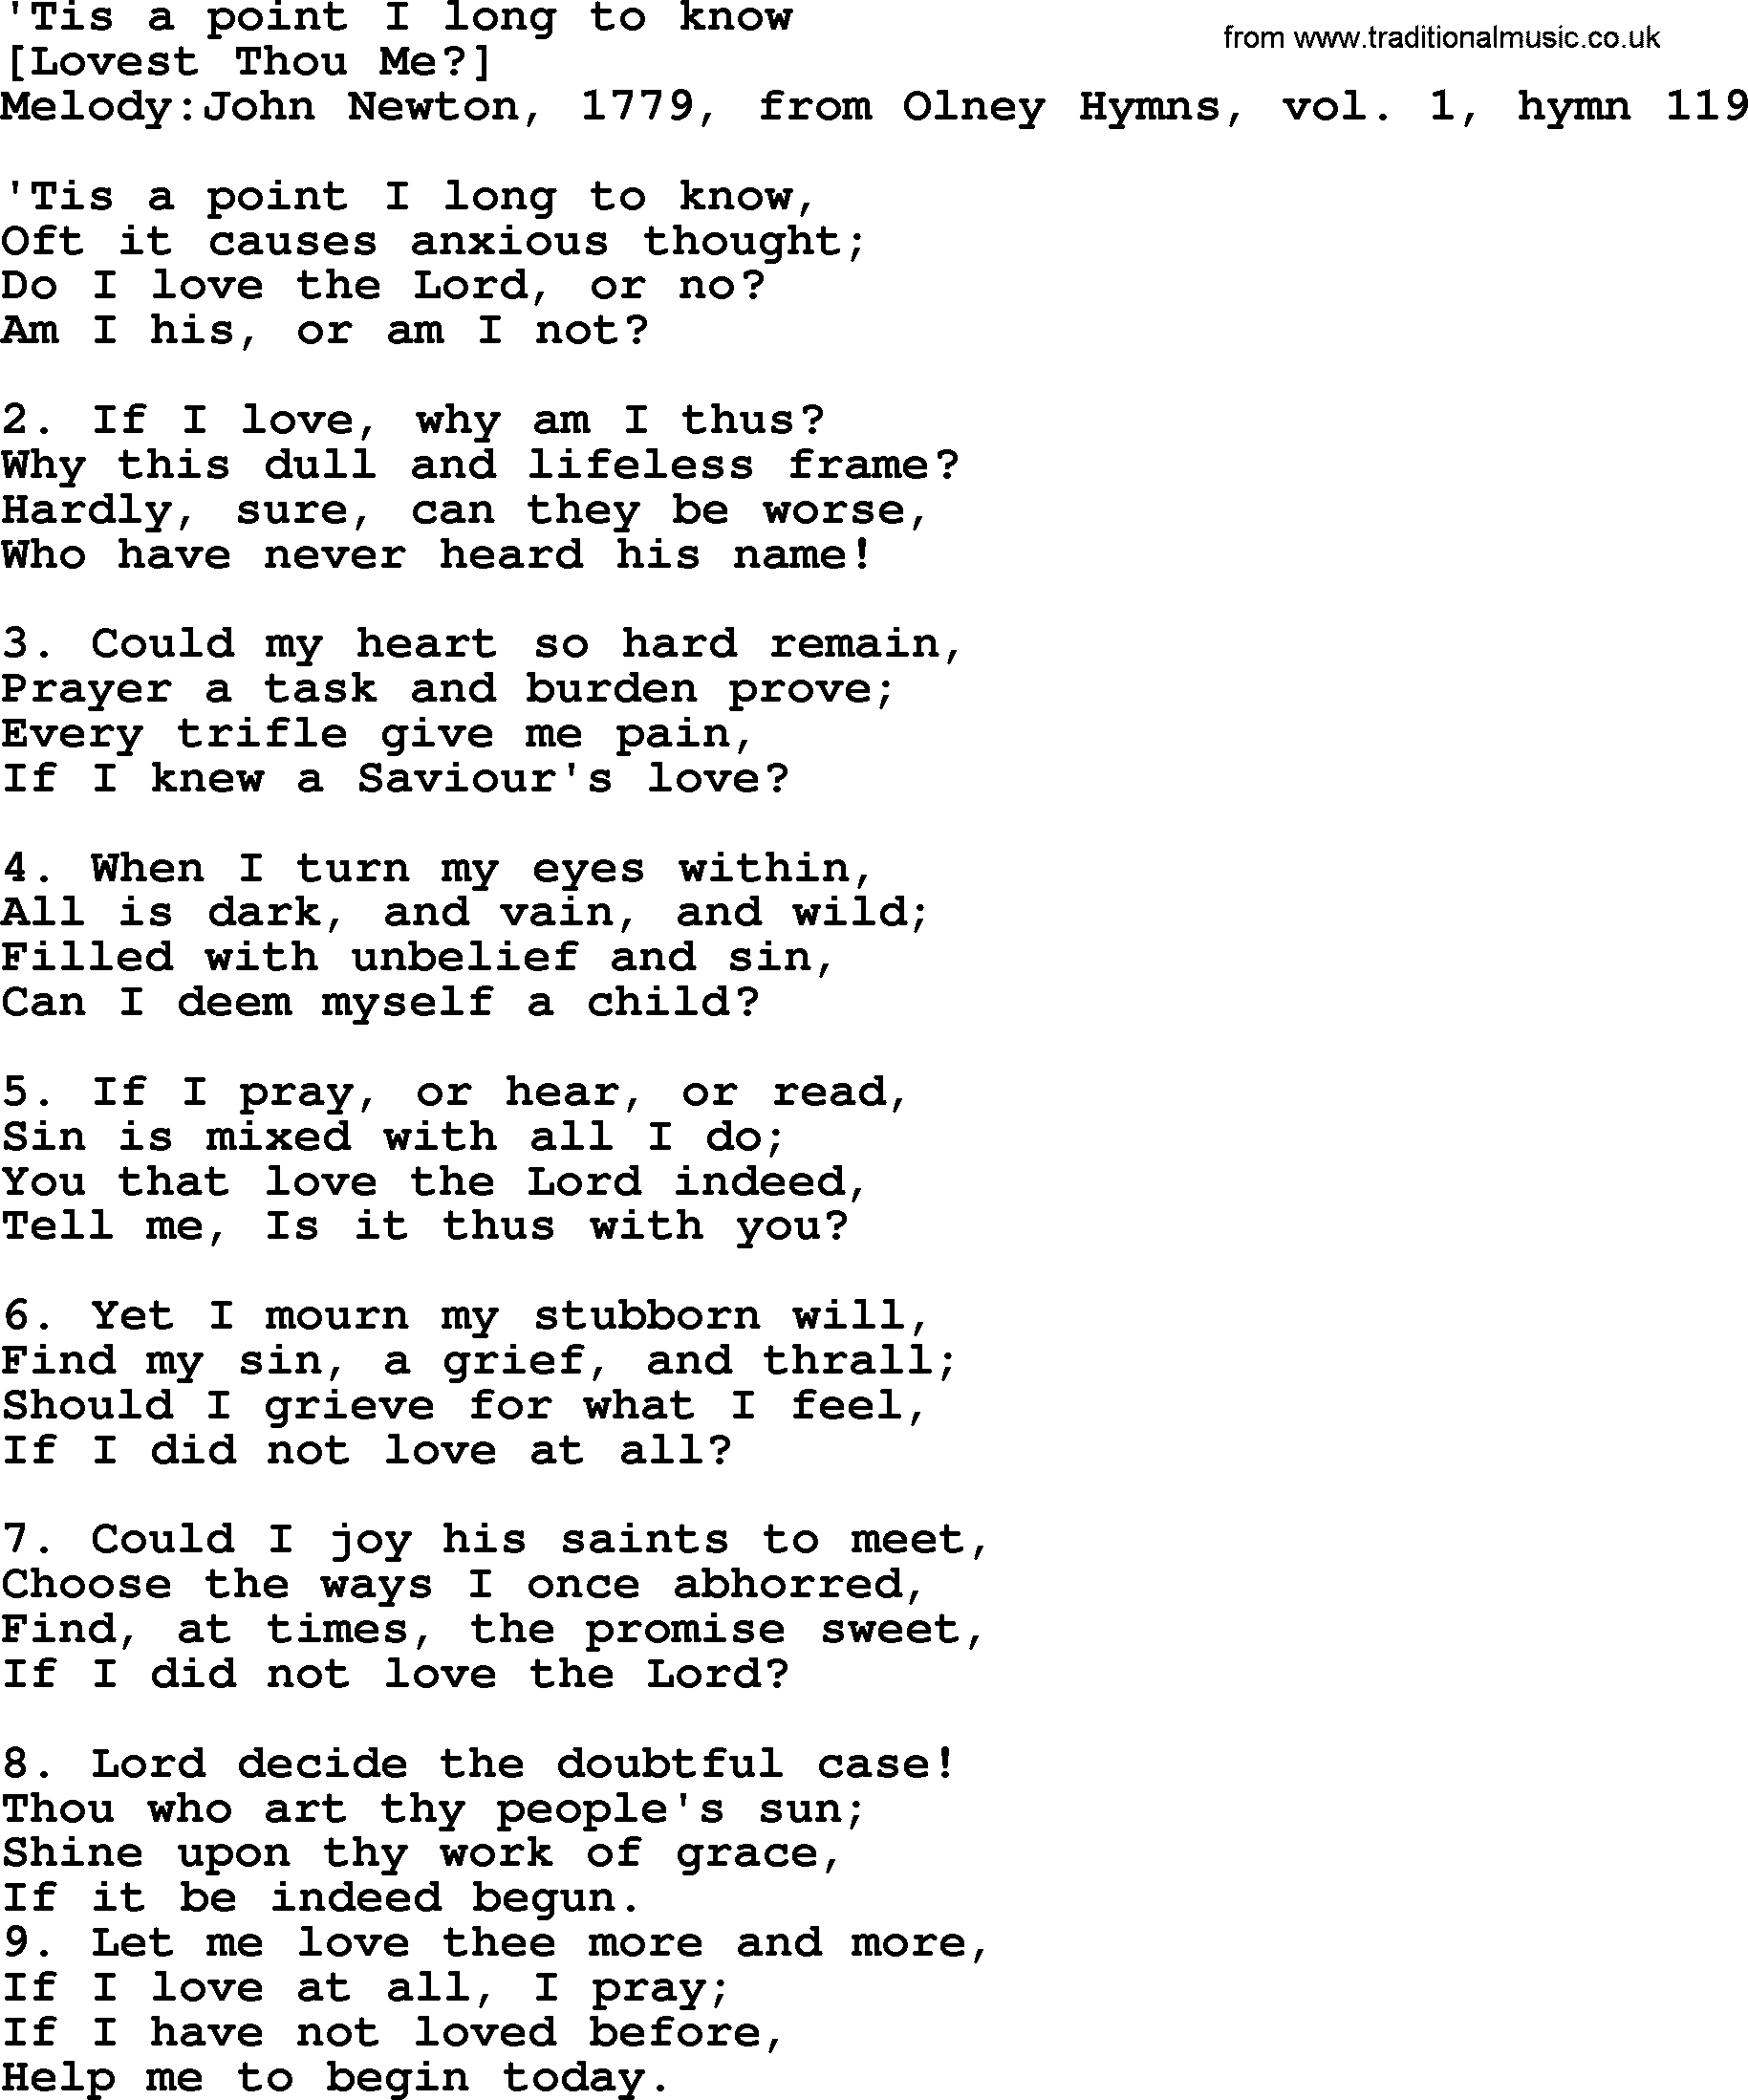 Old English Song Lyrics For Tis A Point I Long To Know With Pdf